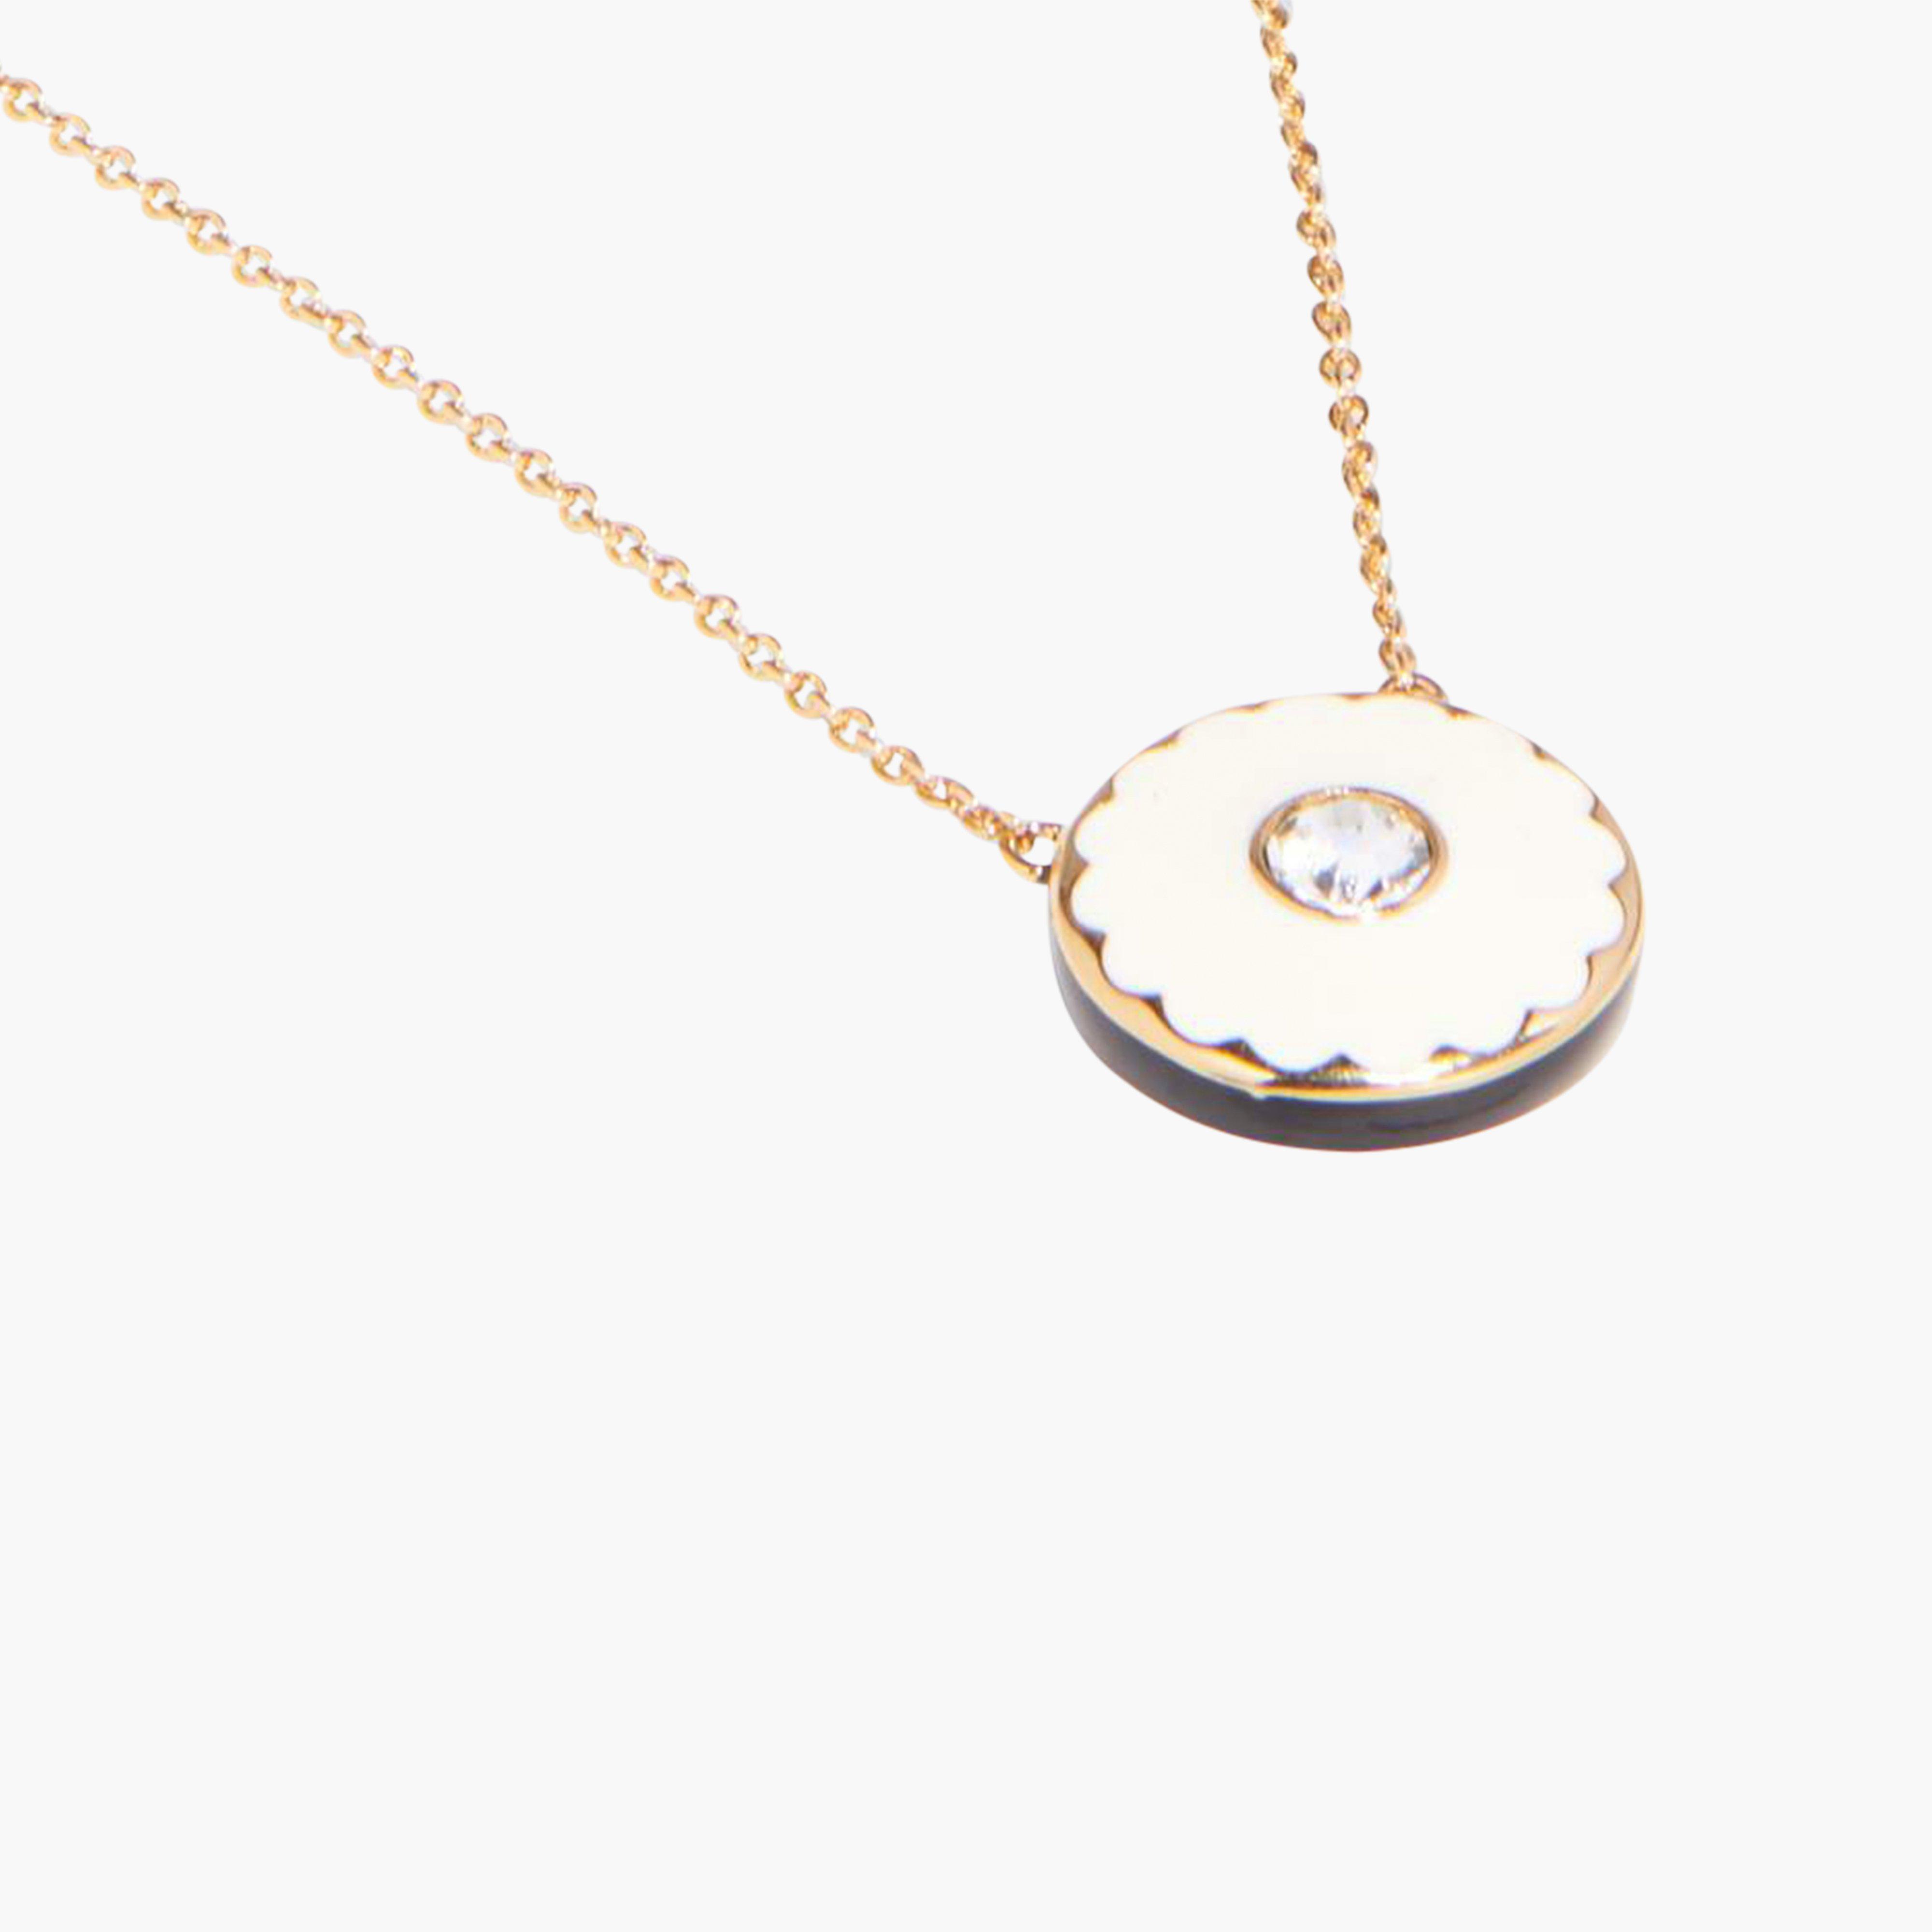 Marc by Marc jacobs The Medallion Pendant,CREAM/GOLD